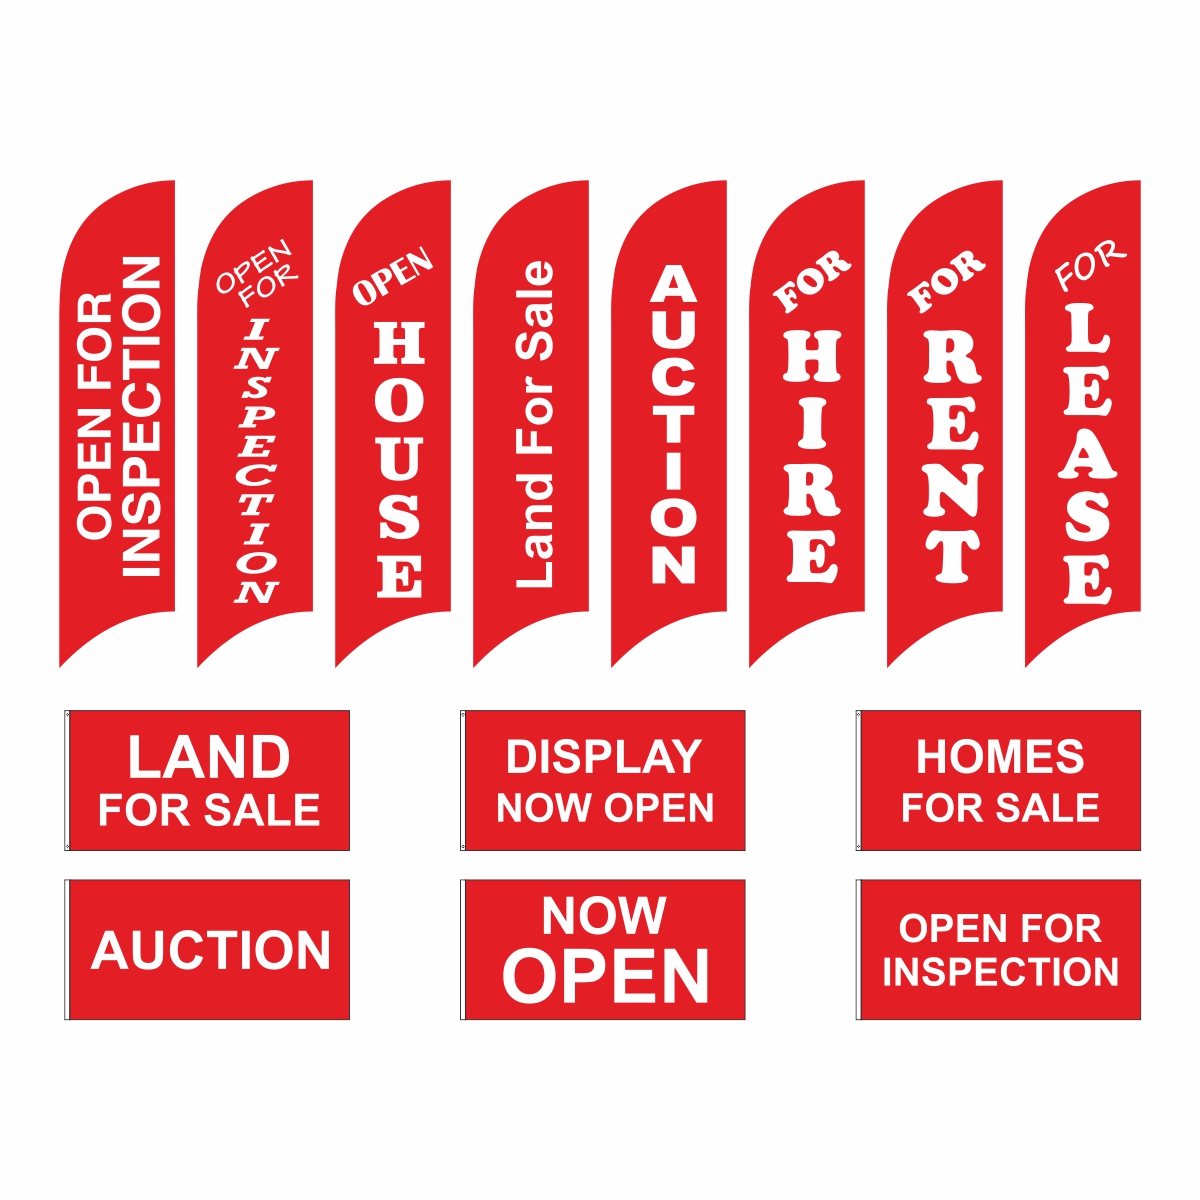 Premade real estate flags